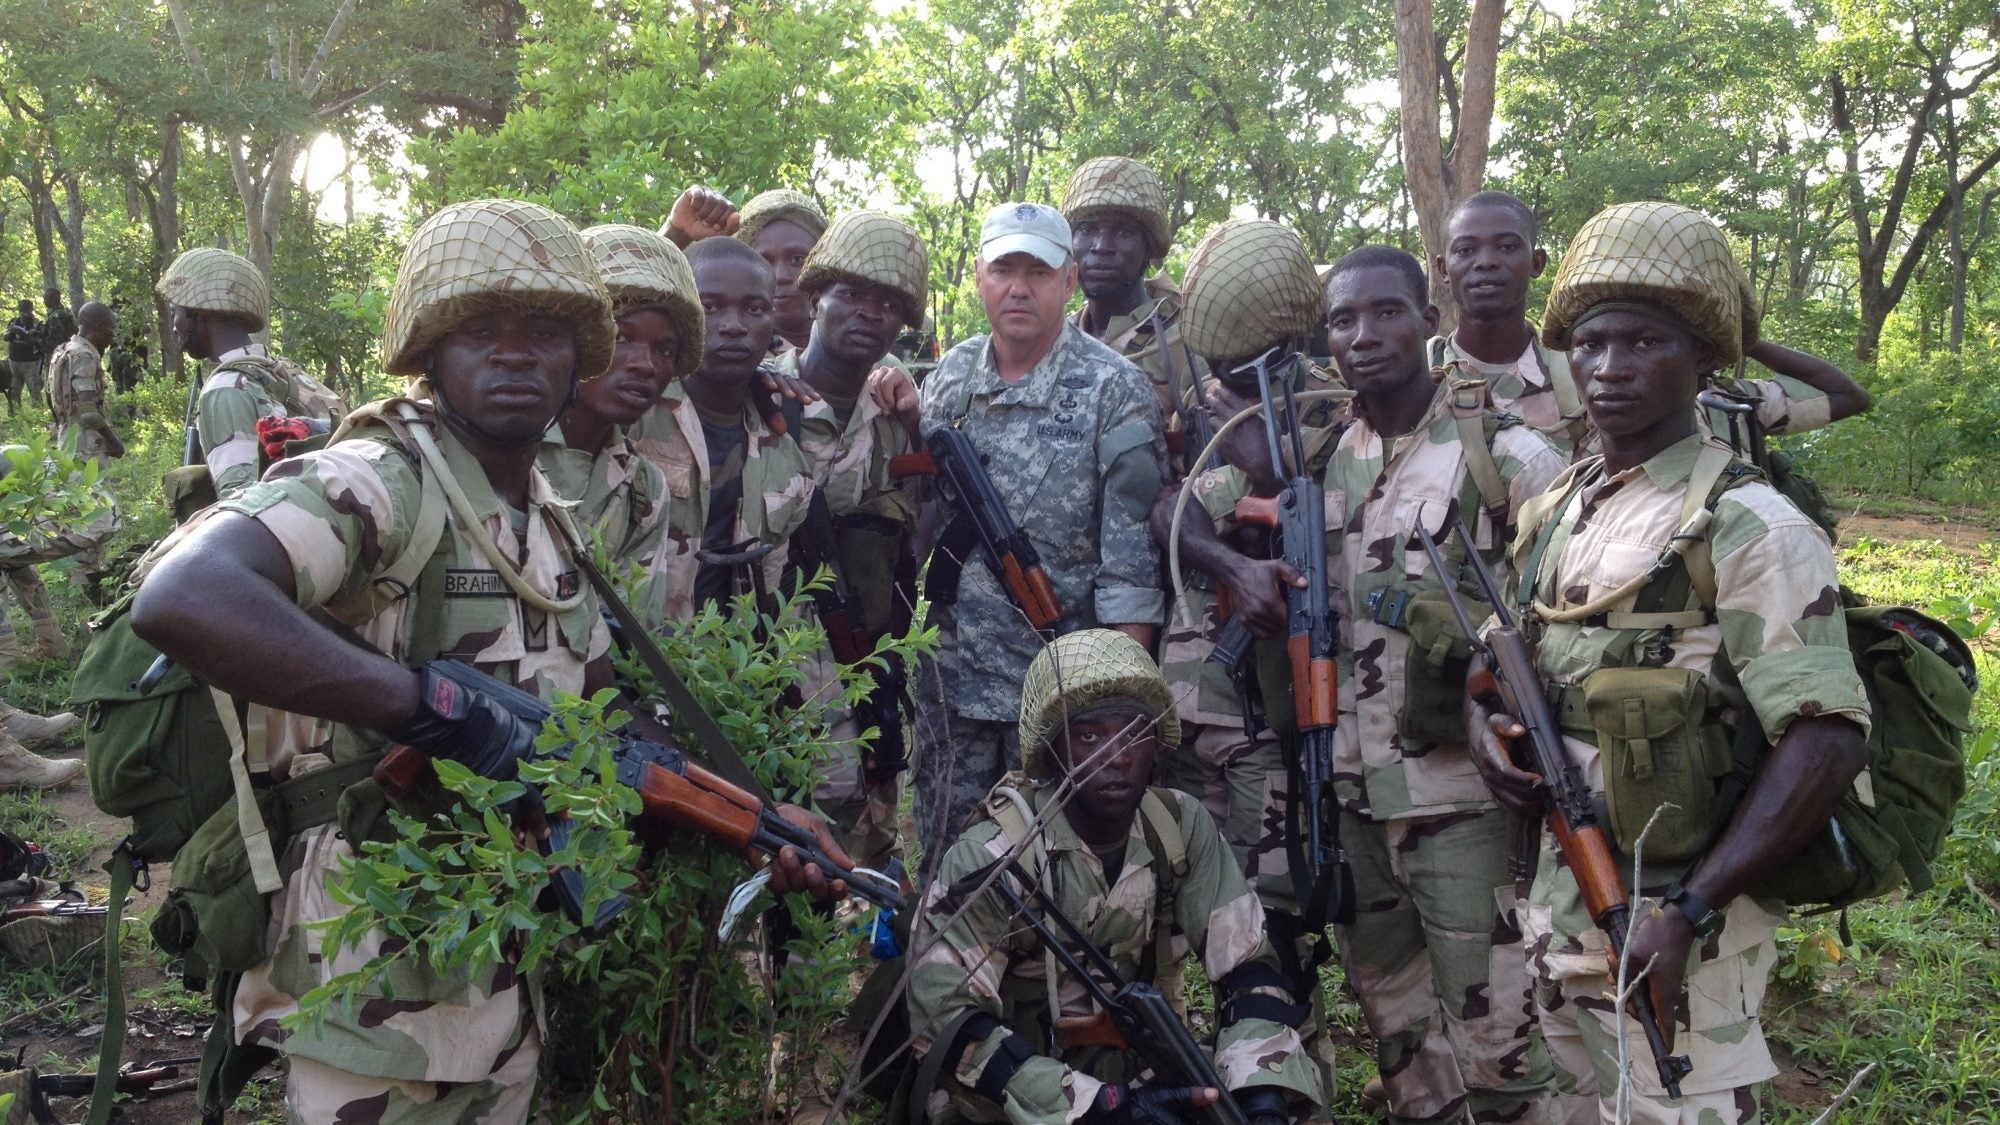 A California National Guard Special Forces soldier poses with Nigerian soldiers in 2014 during a training mission in Nigeria.